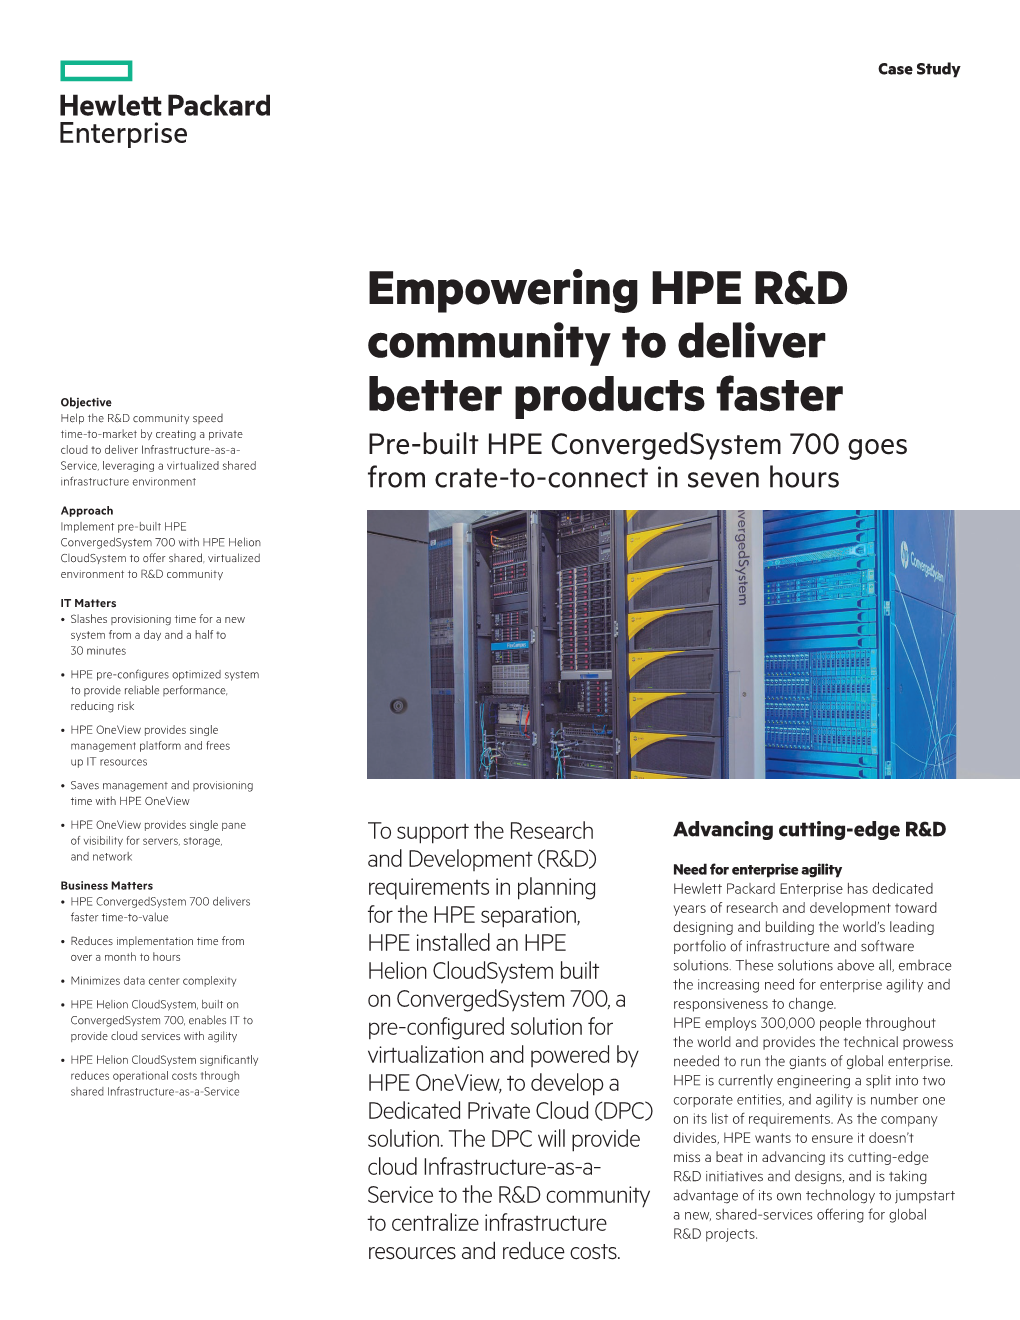 Empowering HPE R&D Community to Deliver Better Products Faster